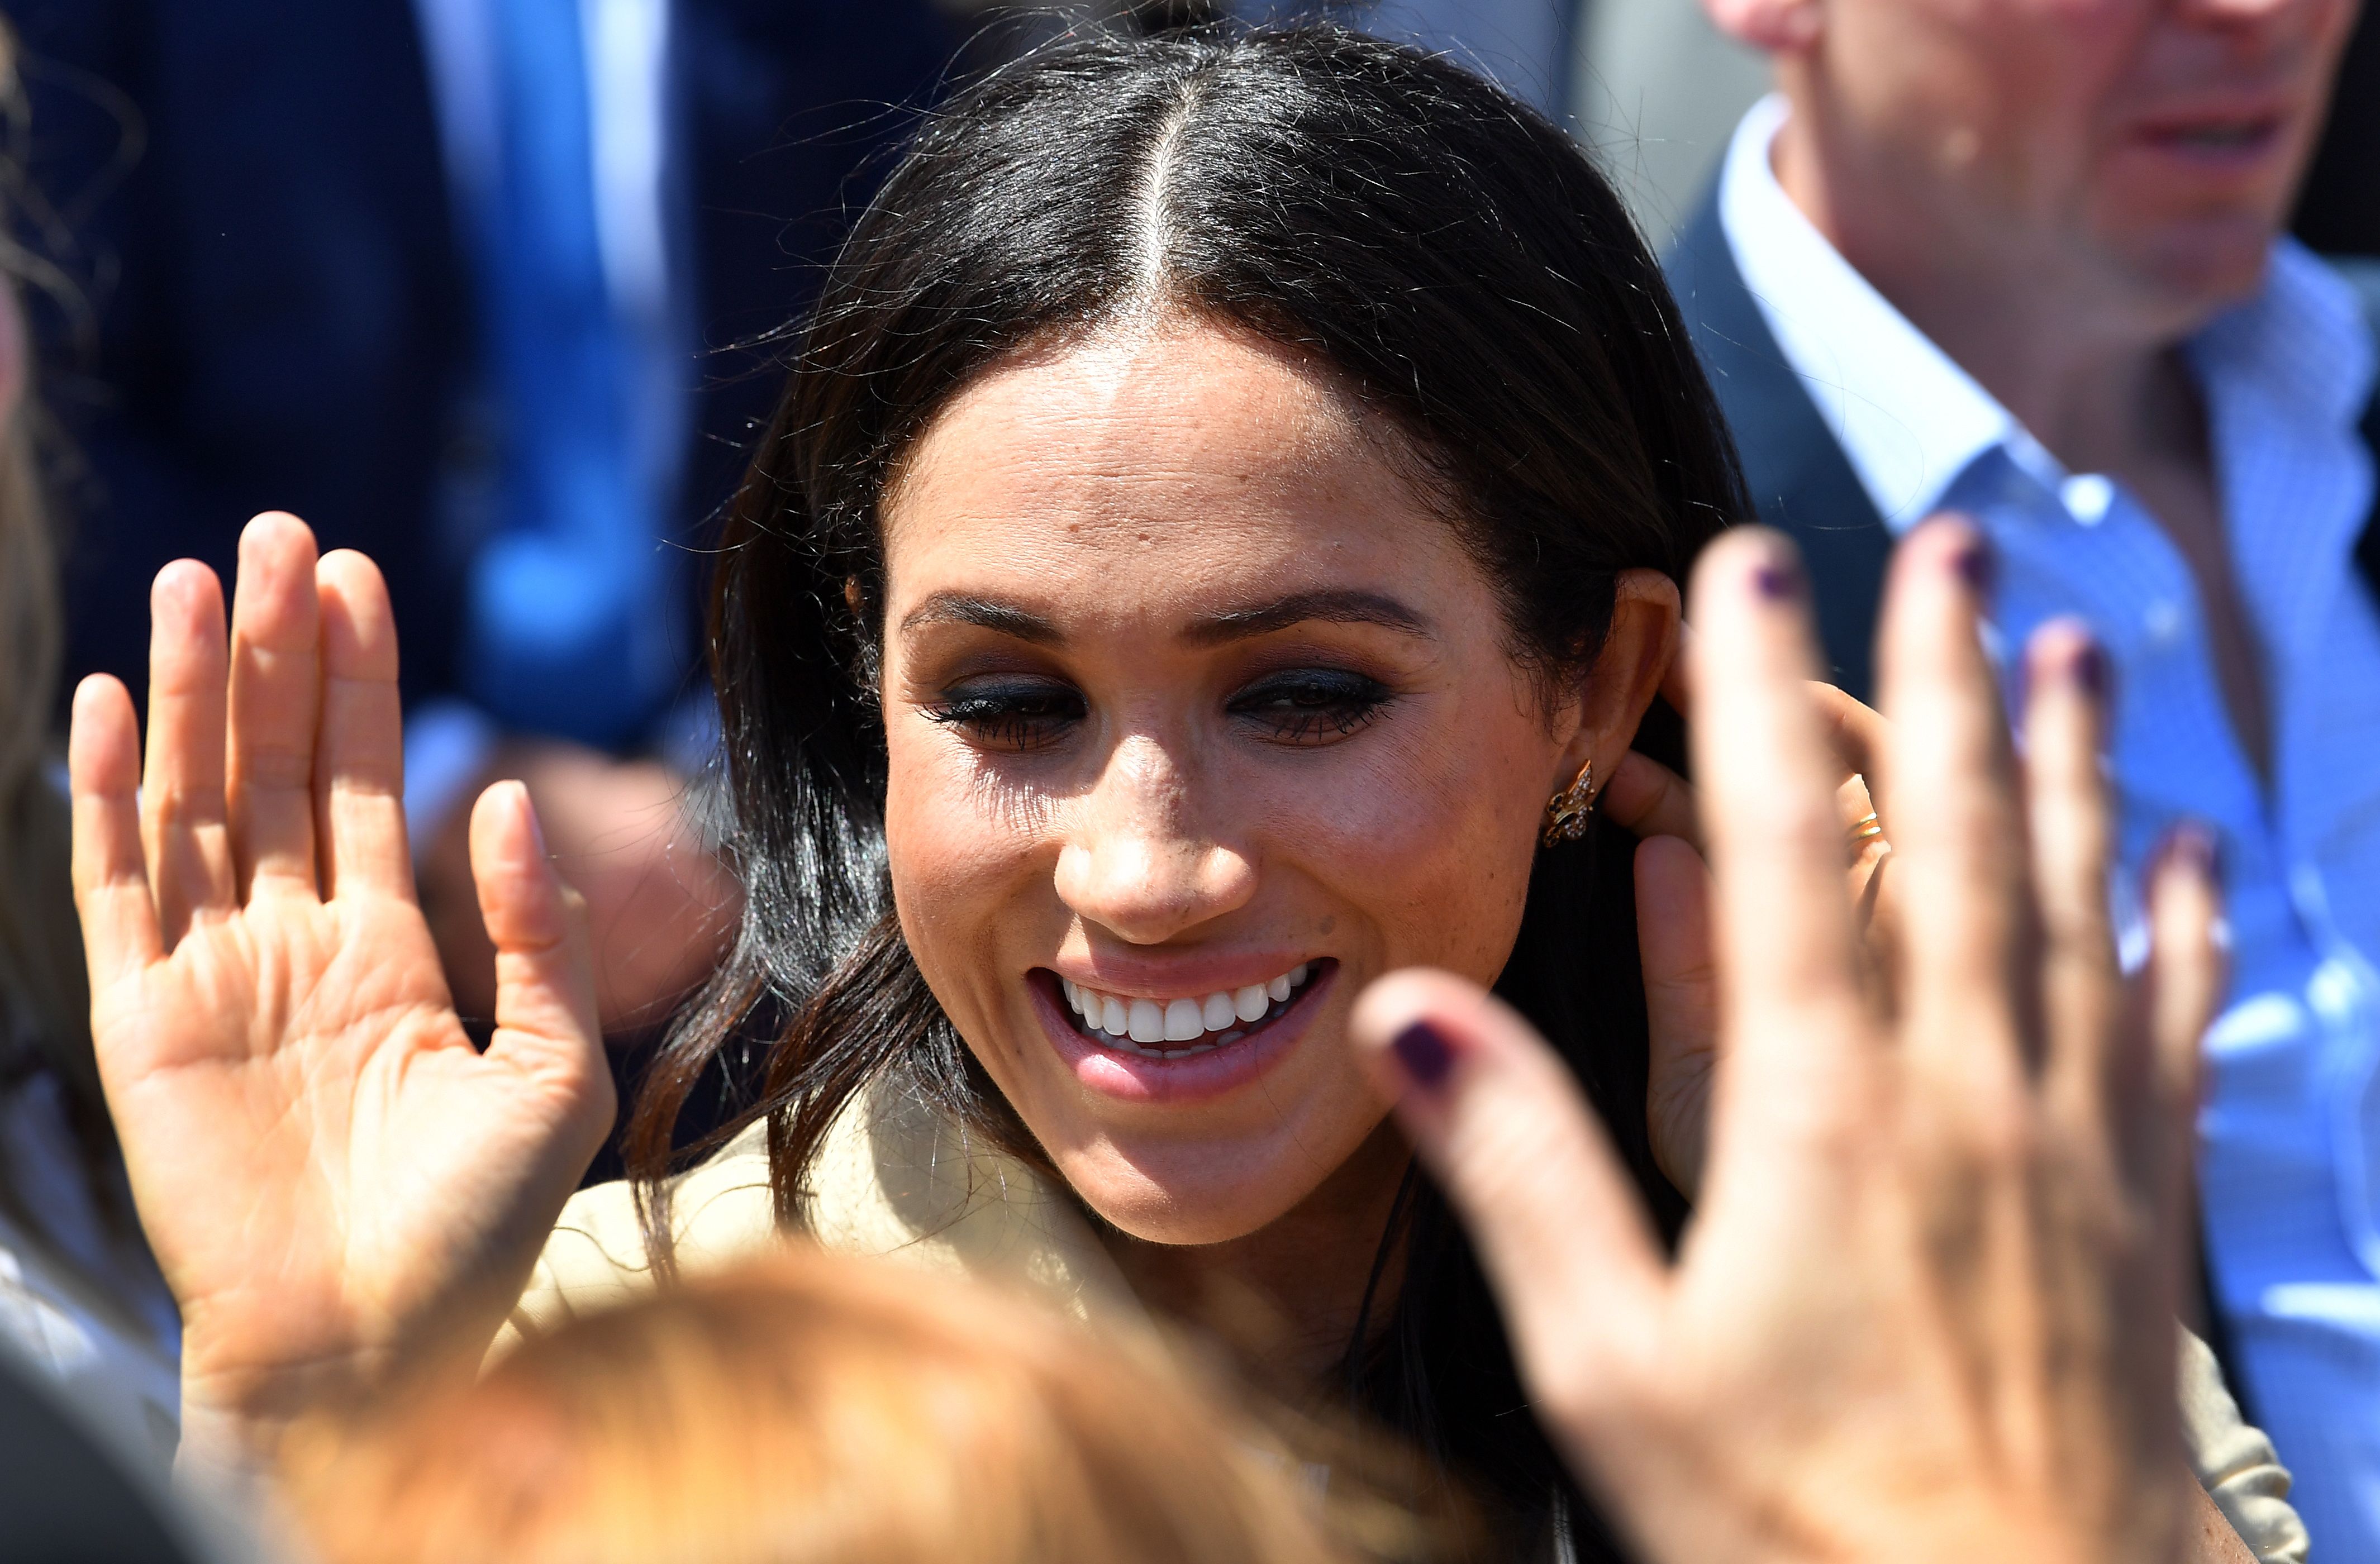 Meghan Markle smiles as she meets with people outside the Sydneys iconic Opera House on October 16, 2018 | Source: Getty Images 